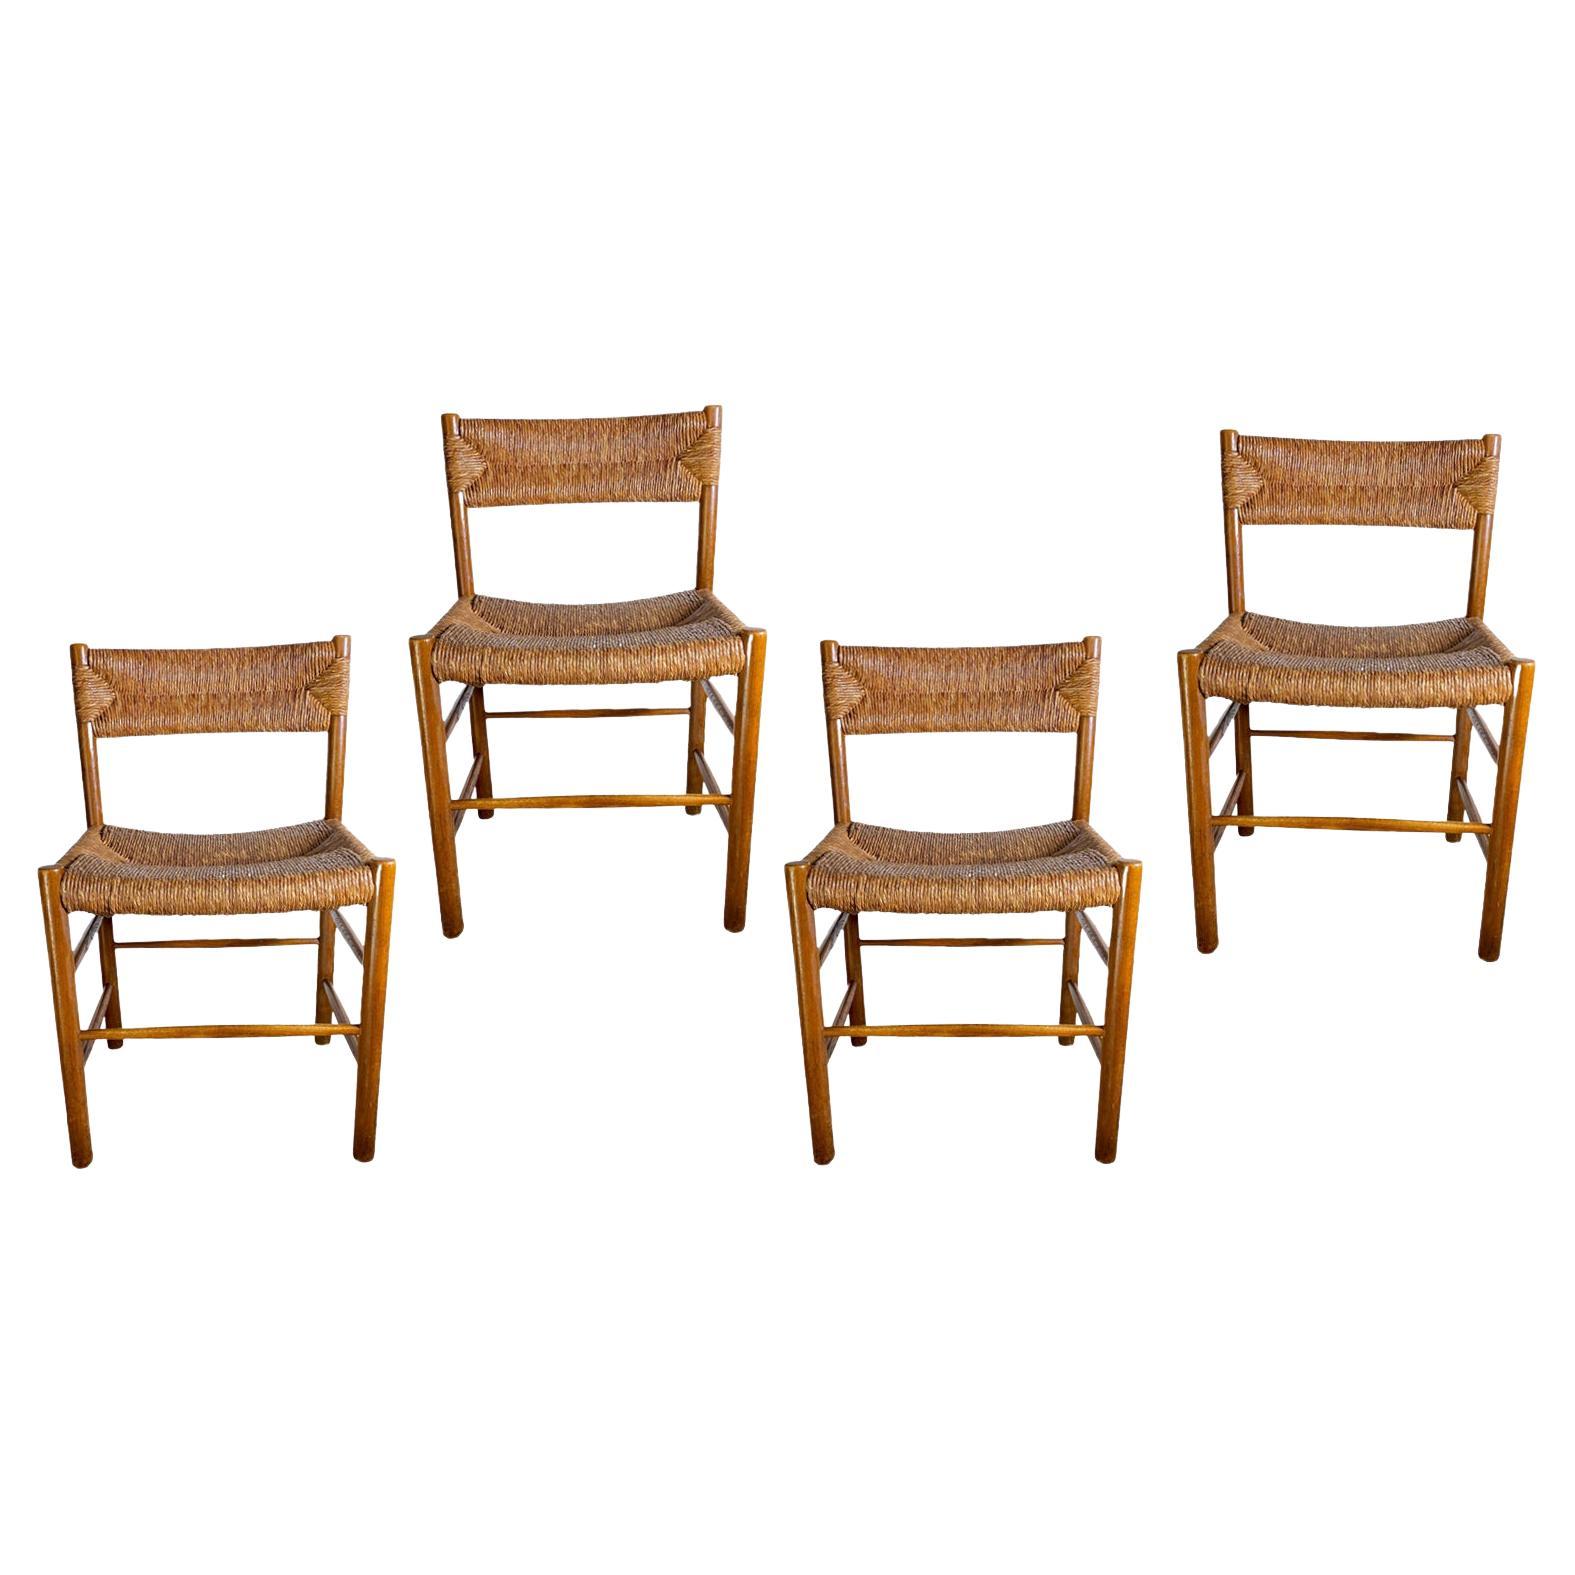 We have here a very rare lot, of 4 identical chairs, of the Dordogne model, by Charlotte Perriand. This set, is an authentic and original, it comes from a family living in Madrid. This family bought their chairs in the 1960s. They didn't had any